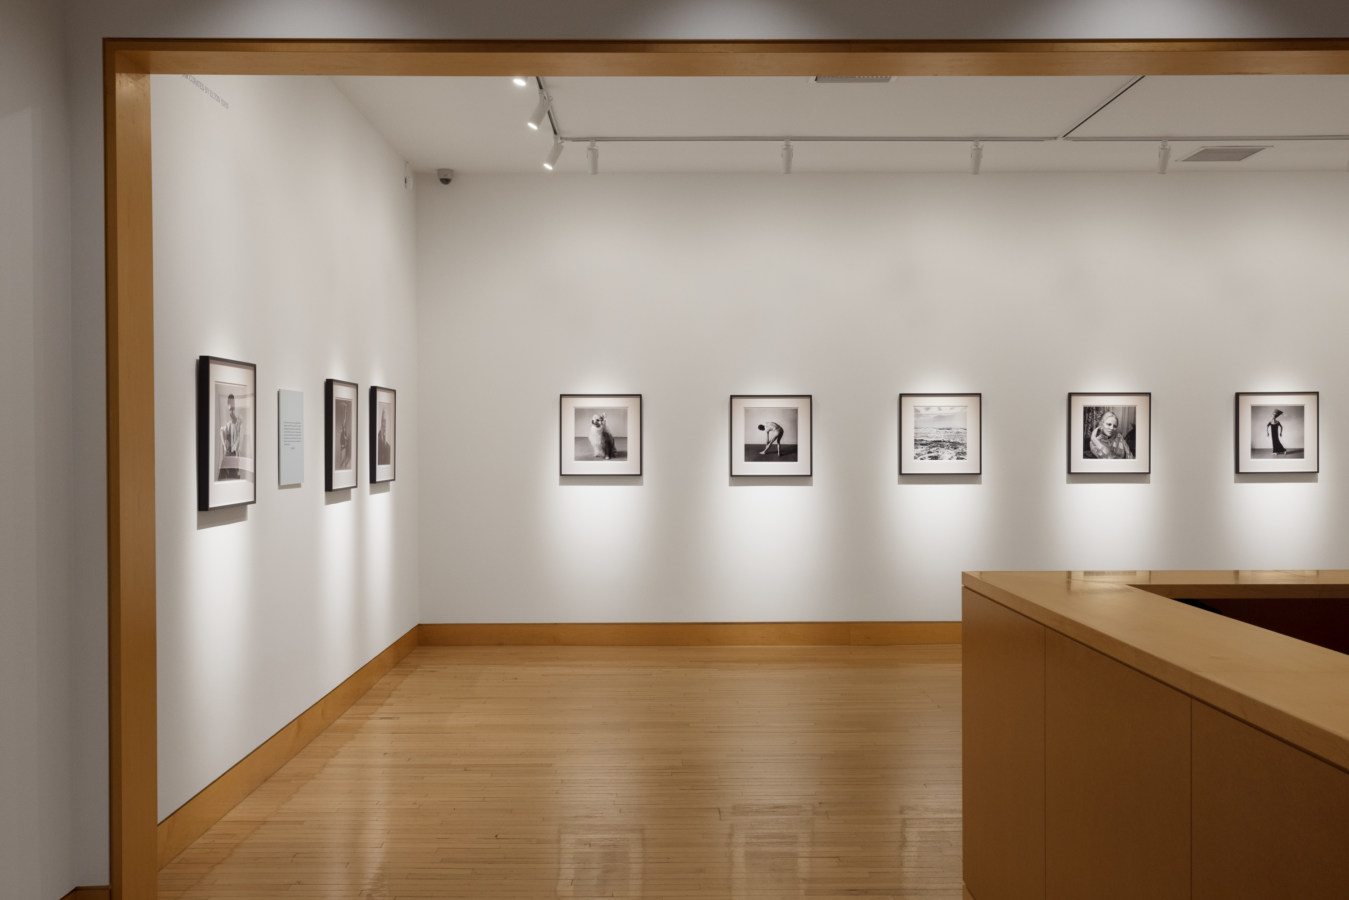 Color image of gallery entryway exhibiting black and white photographs framed in black on white walls